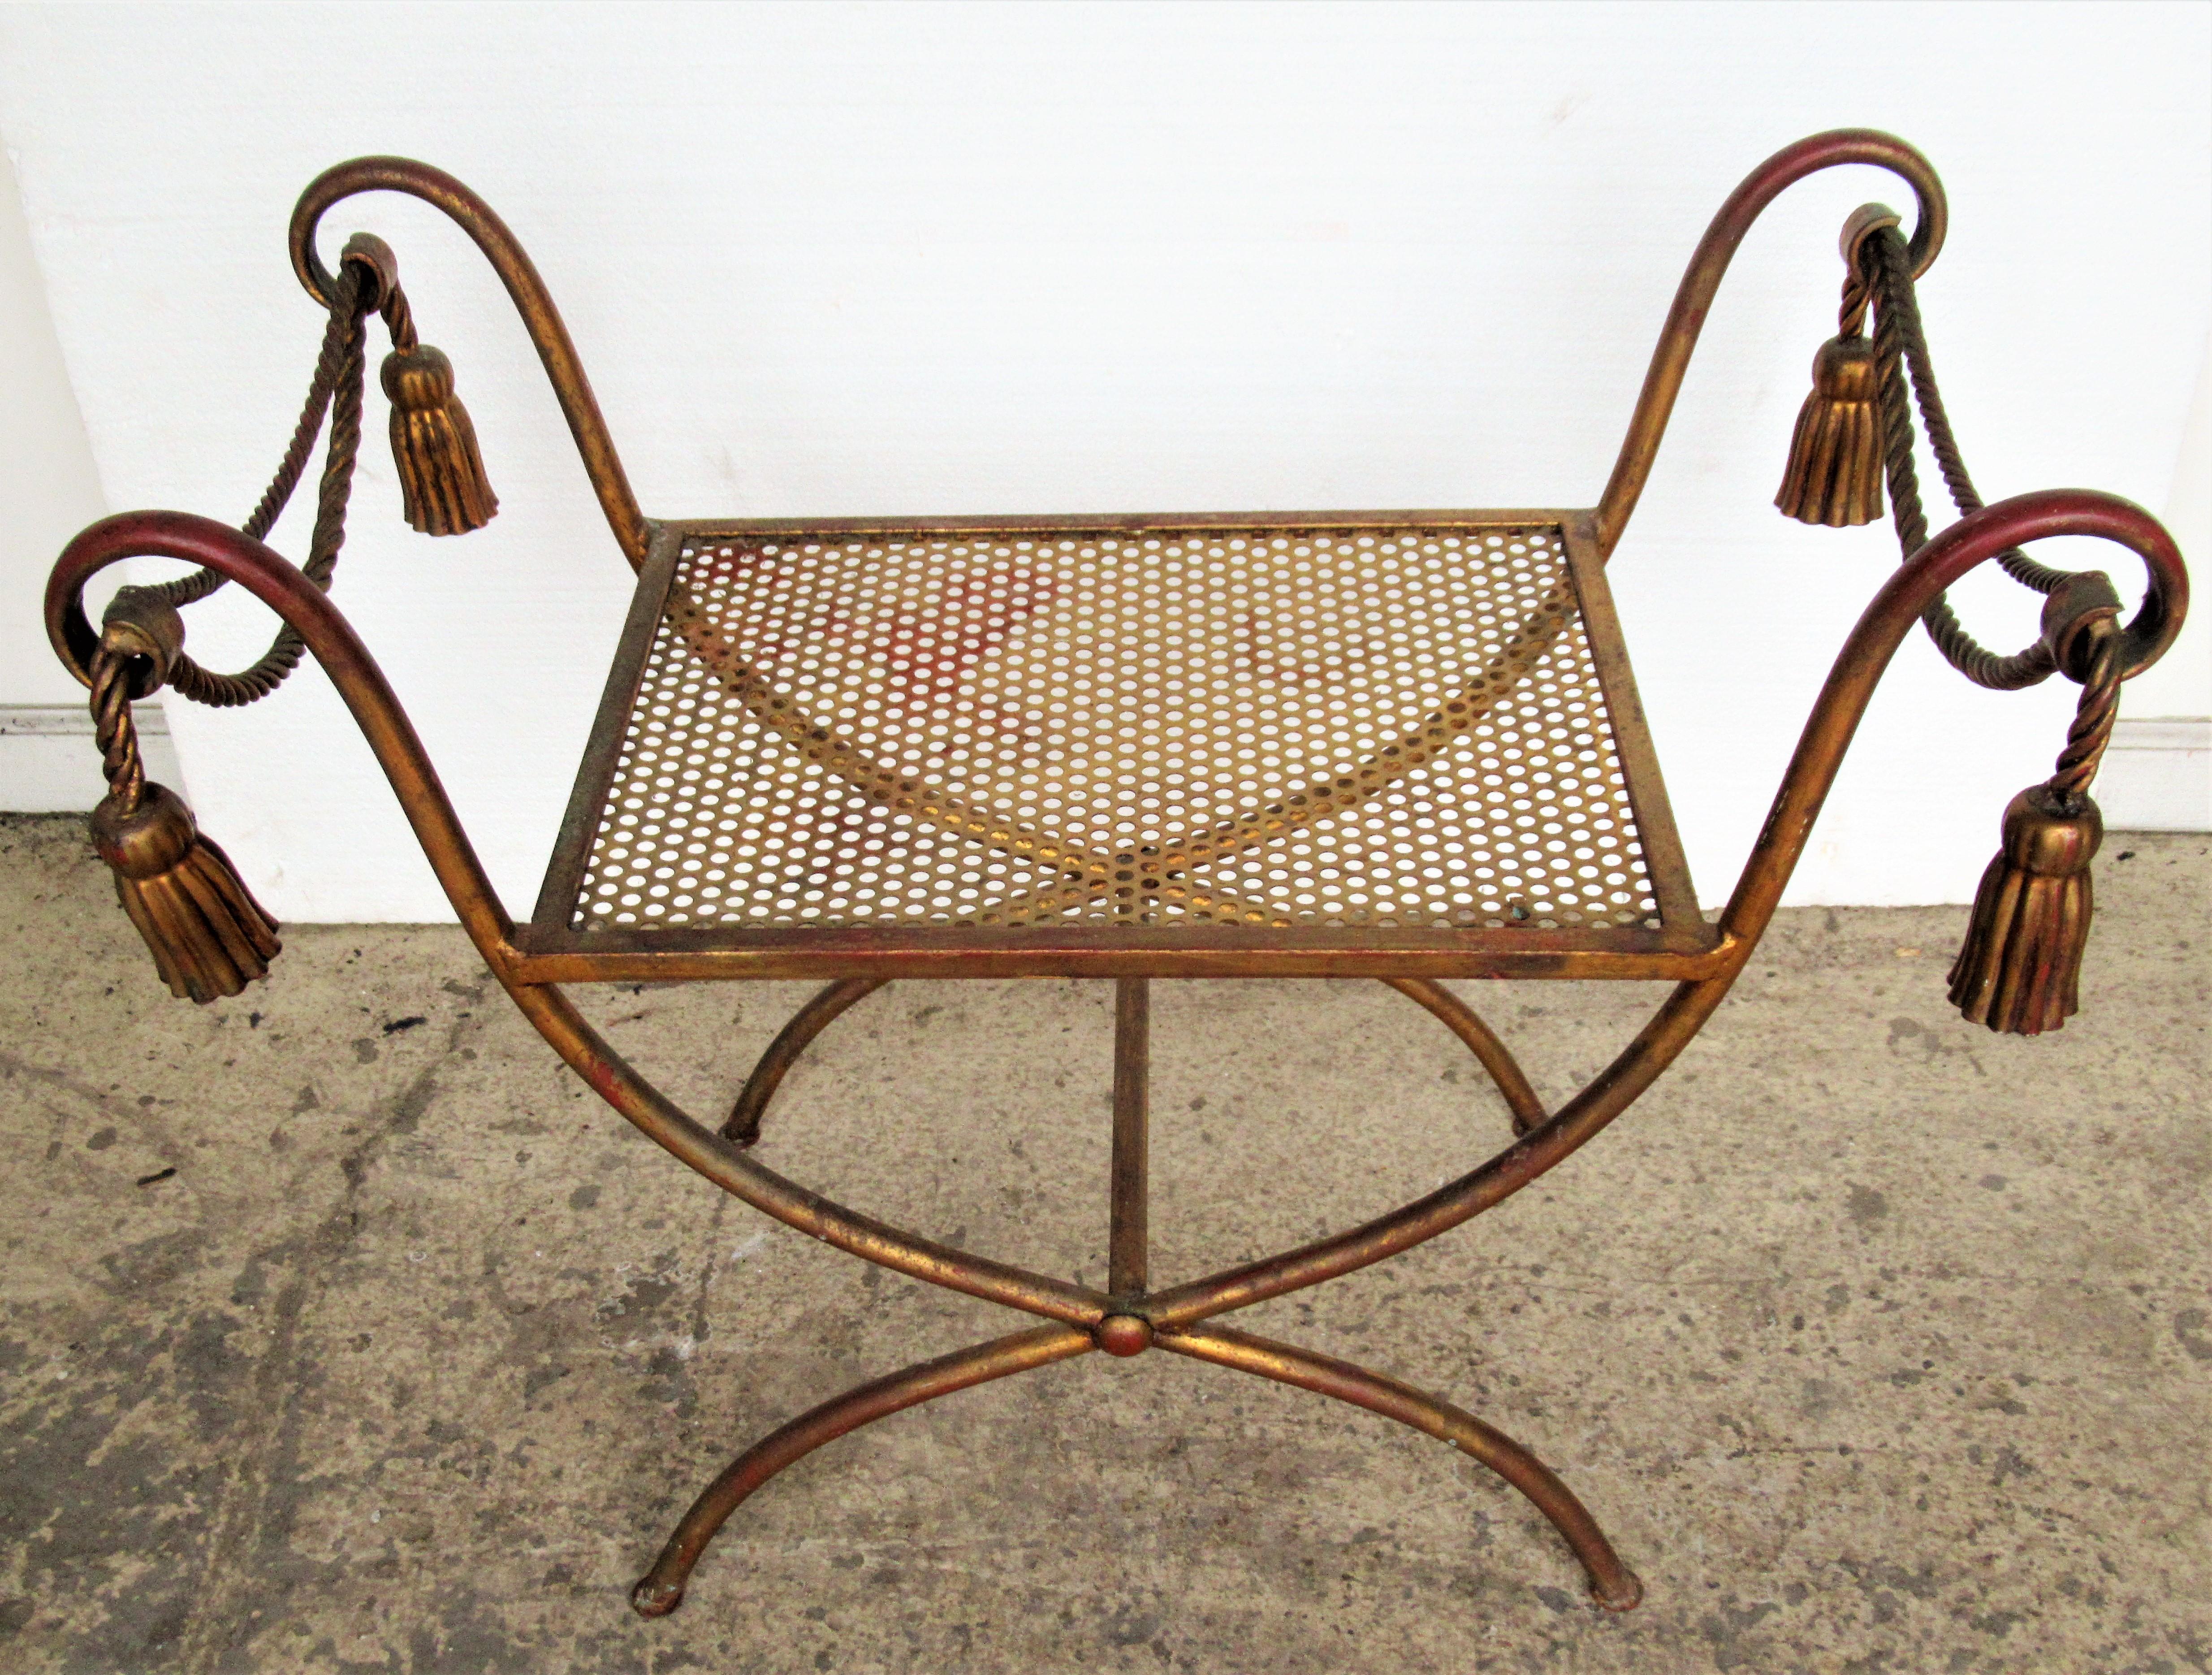 Gilt metal rope and tassel bench in the best all original beautifully aged gilded surface with areas of underlying red bole showing. Made in Italy, circa 1960. This is a good one. Look at all pictures and read condition report in comment section.